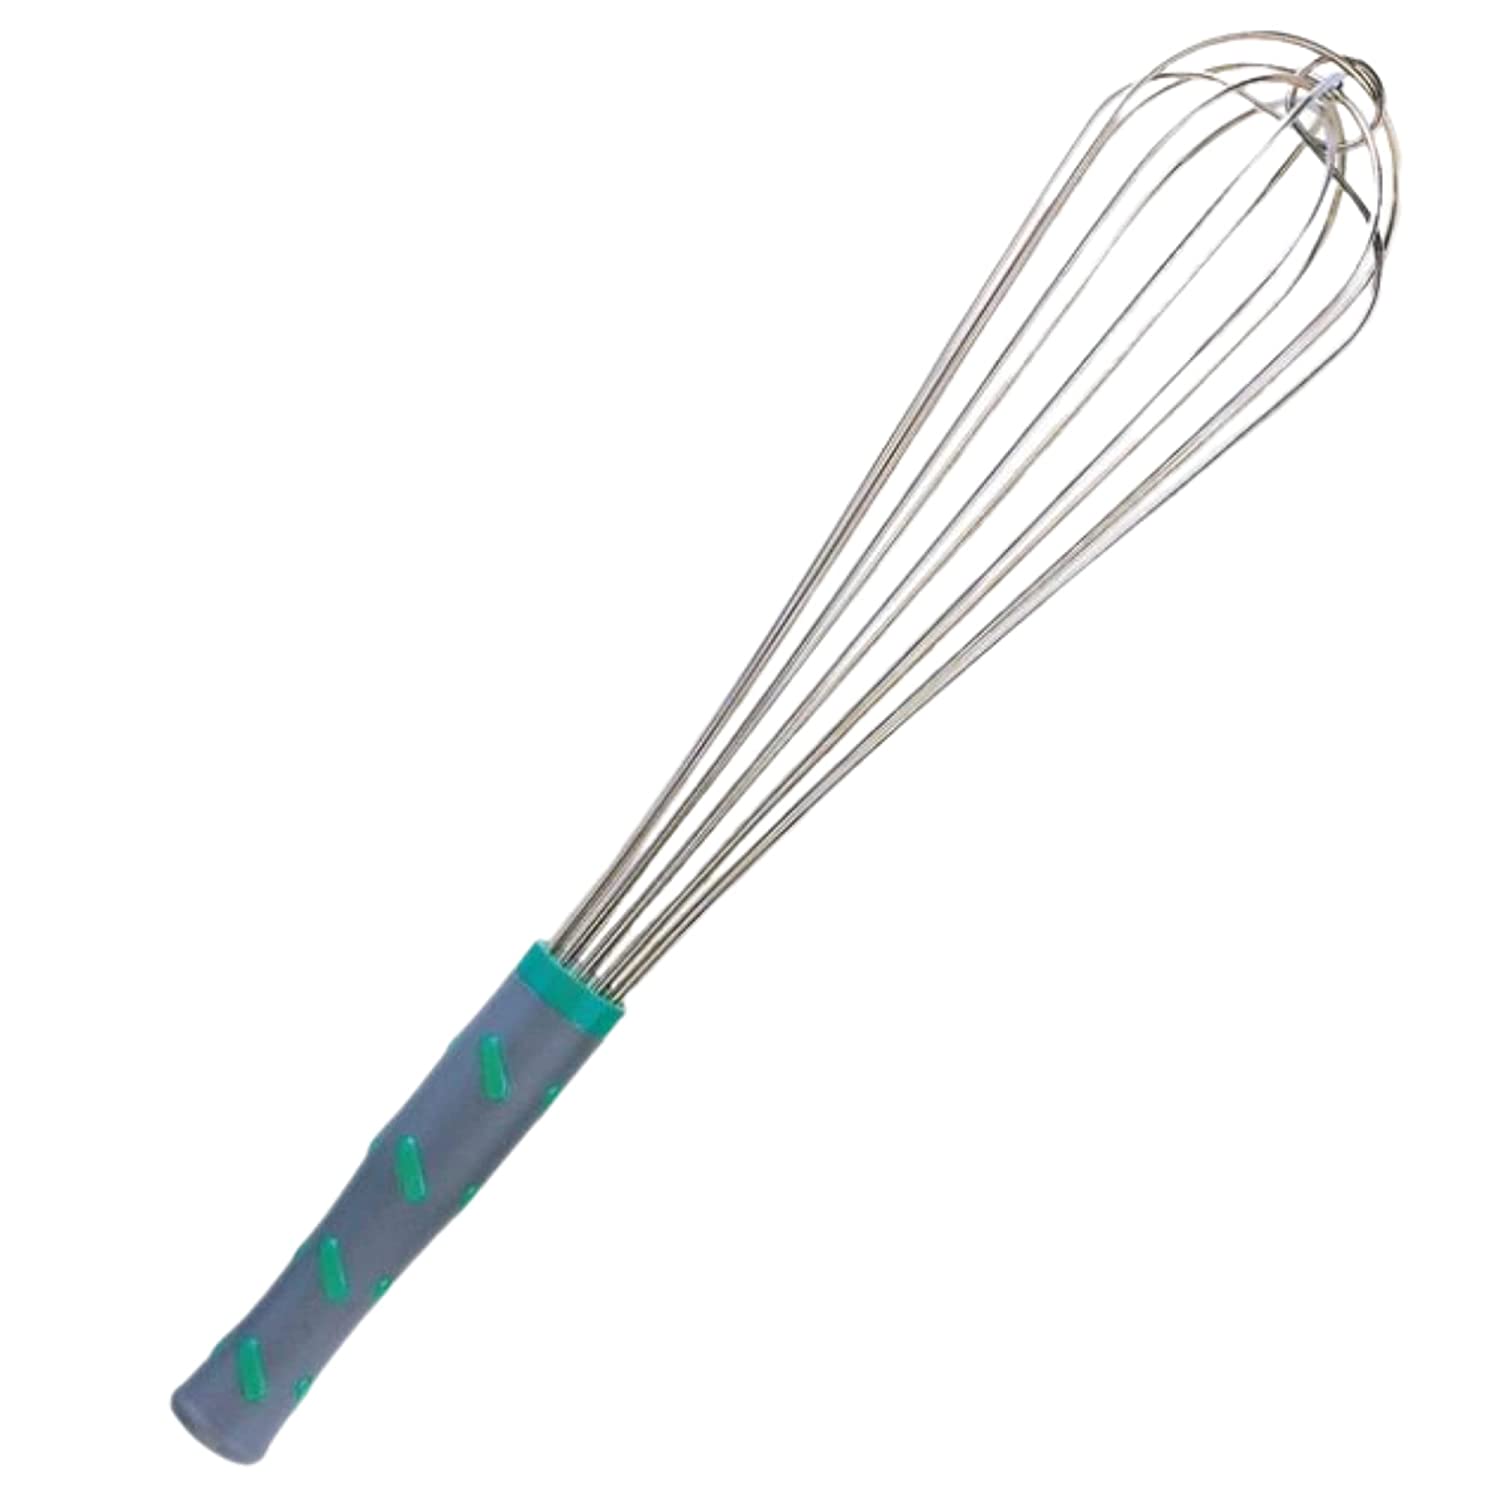 Vollrath Jacob’s Pride 16-Inch French Whip Whisk with Nylon Handle, Stainless Steel, NSF, Silver